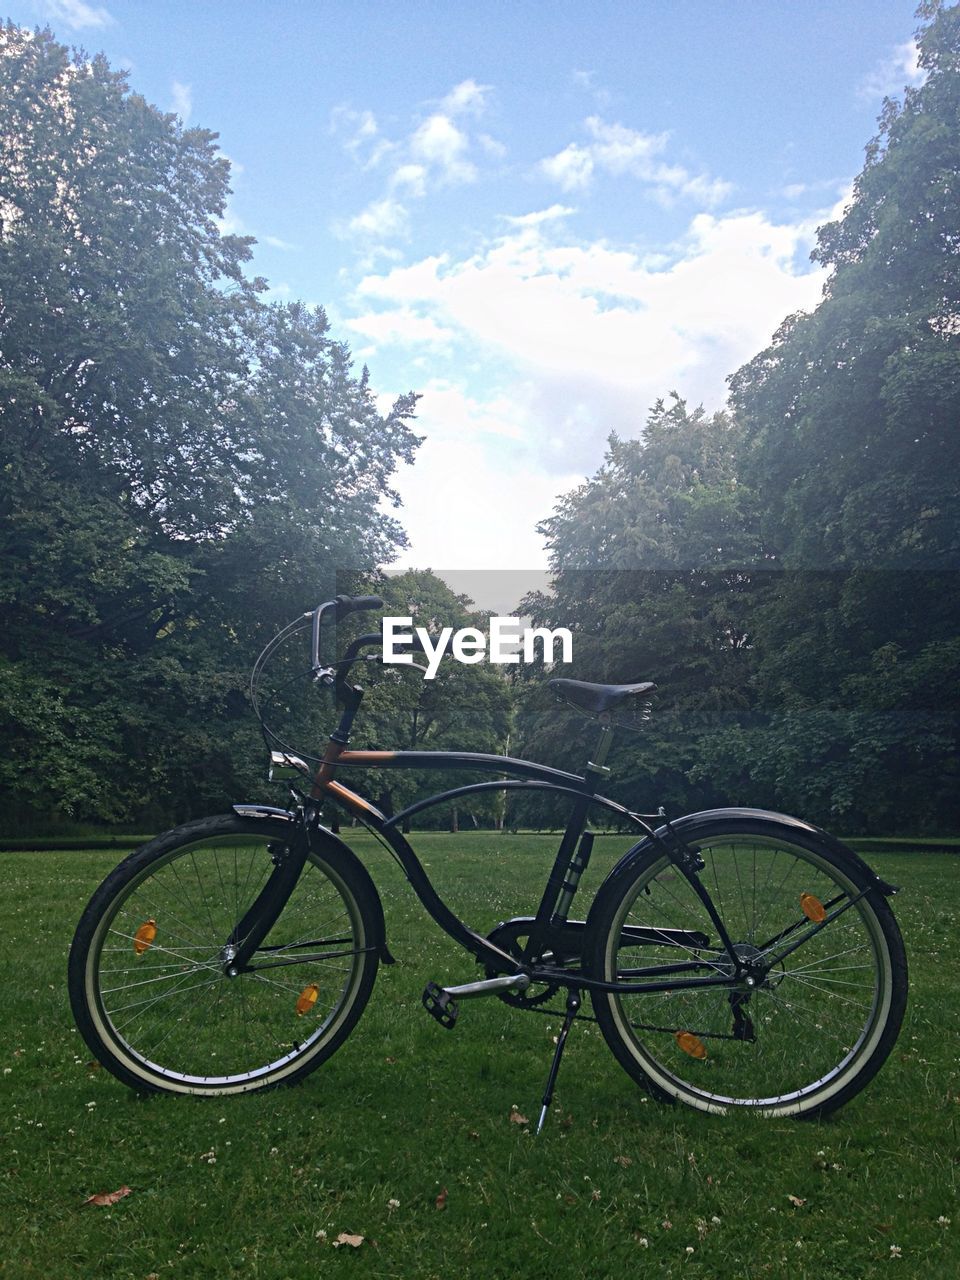 Bicycle parked on grassy field